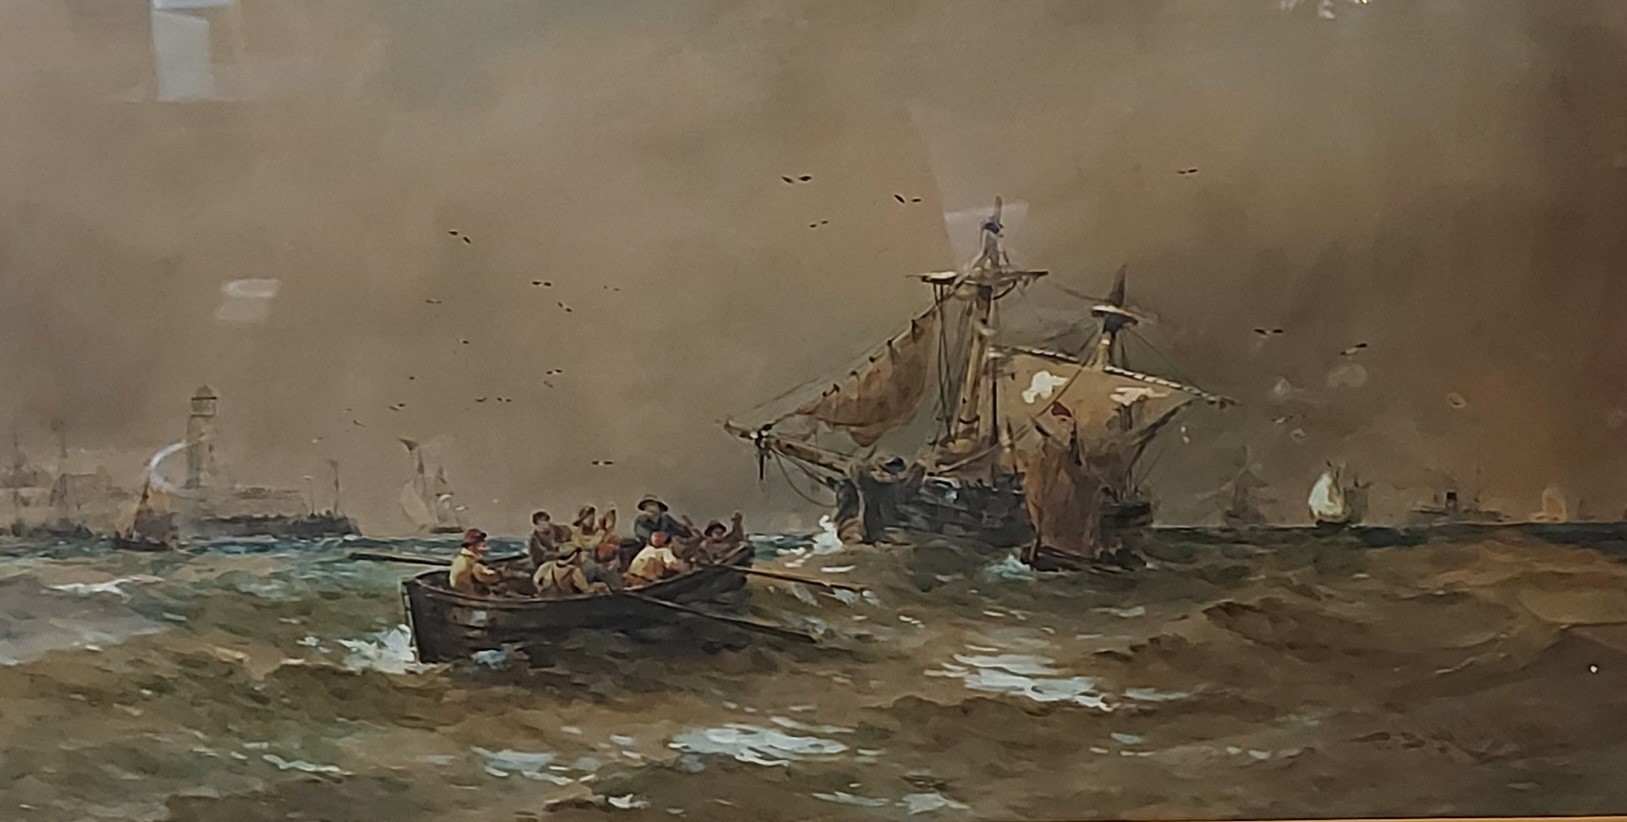 Thomas Bush Hardy, shipping scene with figures in a rowing boat before ships in a rough sea,